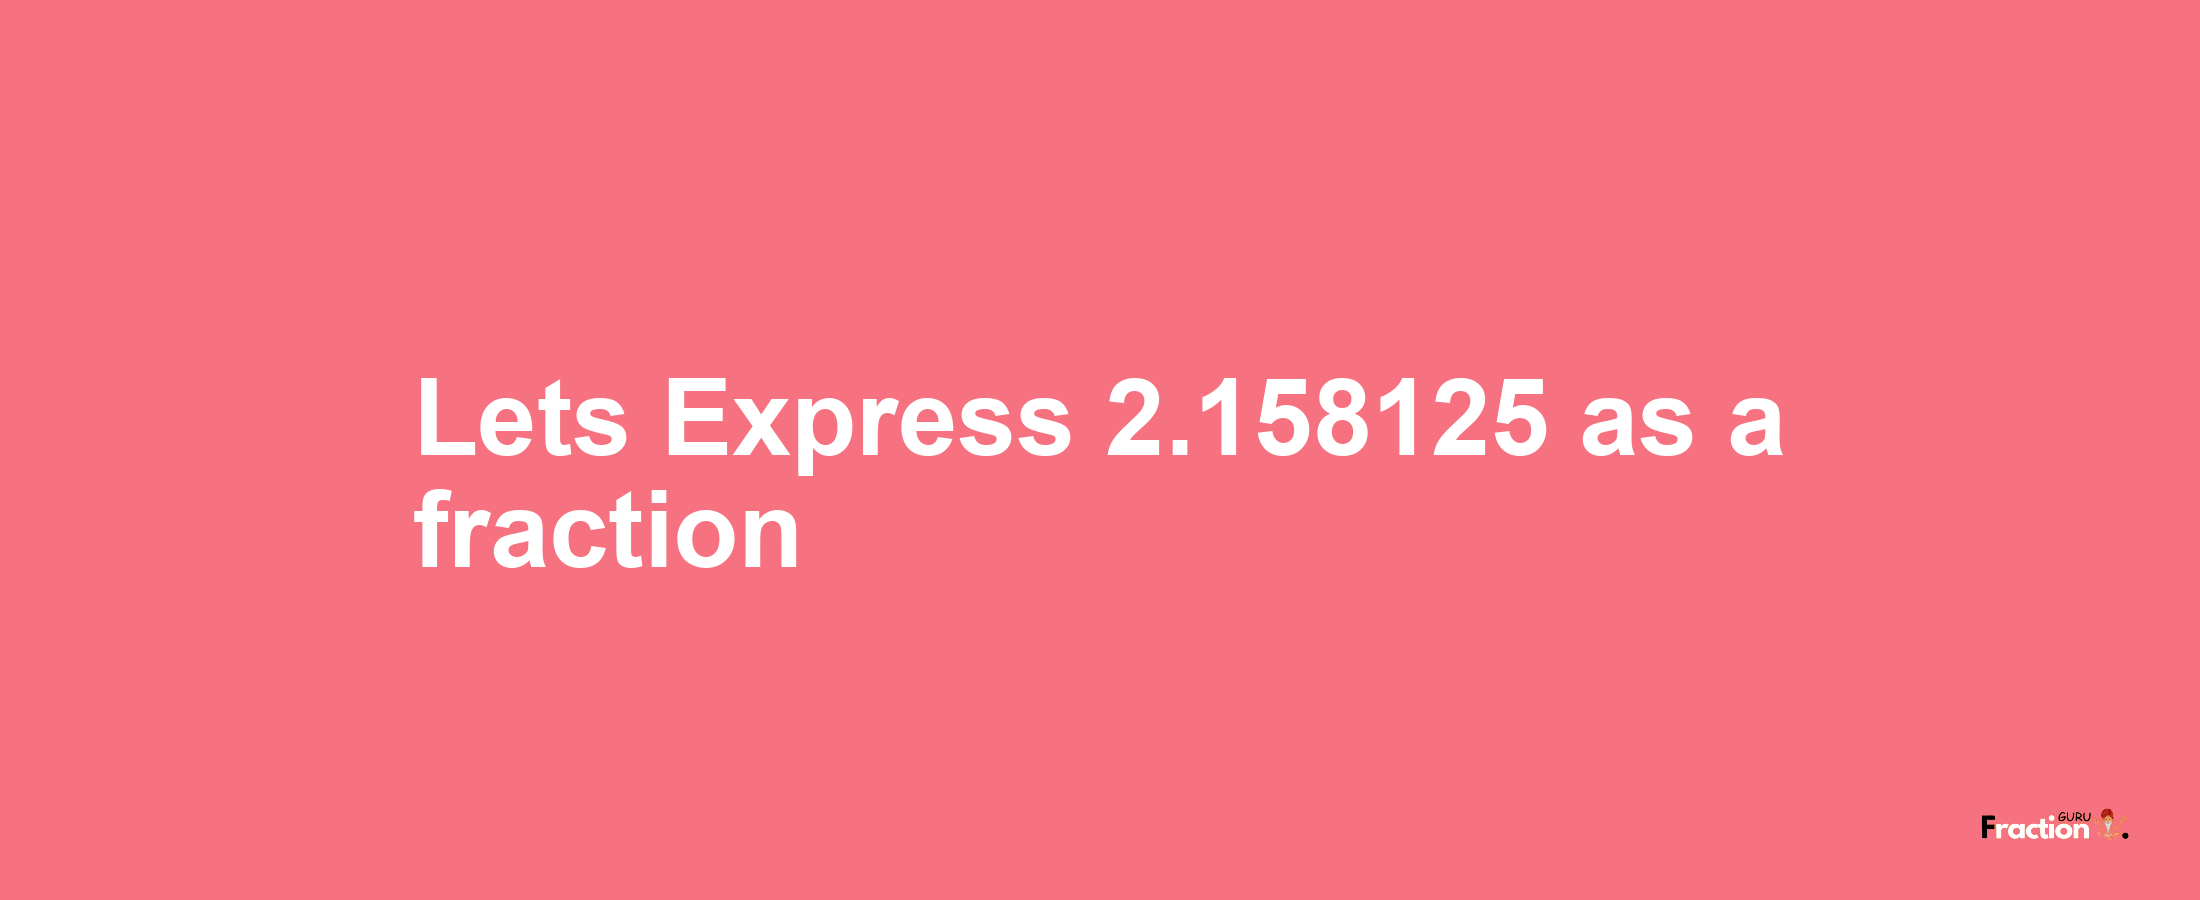 Lets Express 2.158125 as afraction